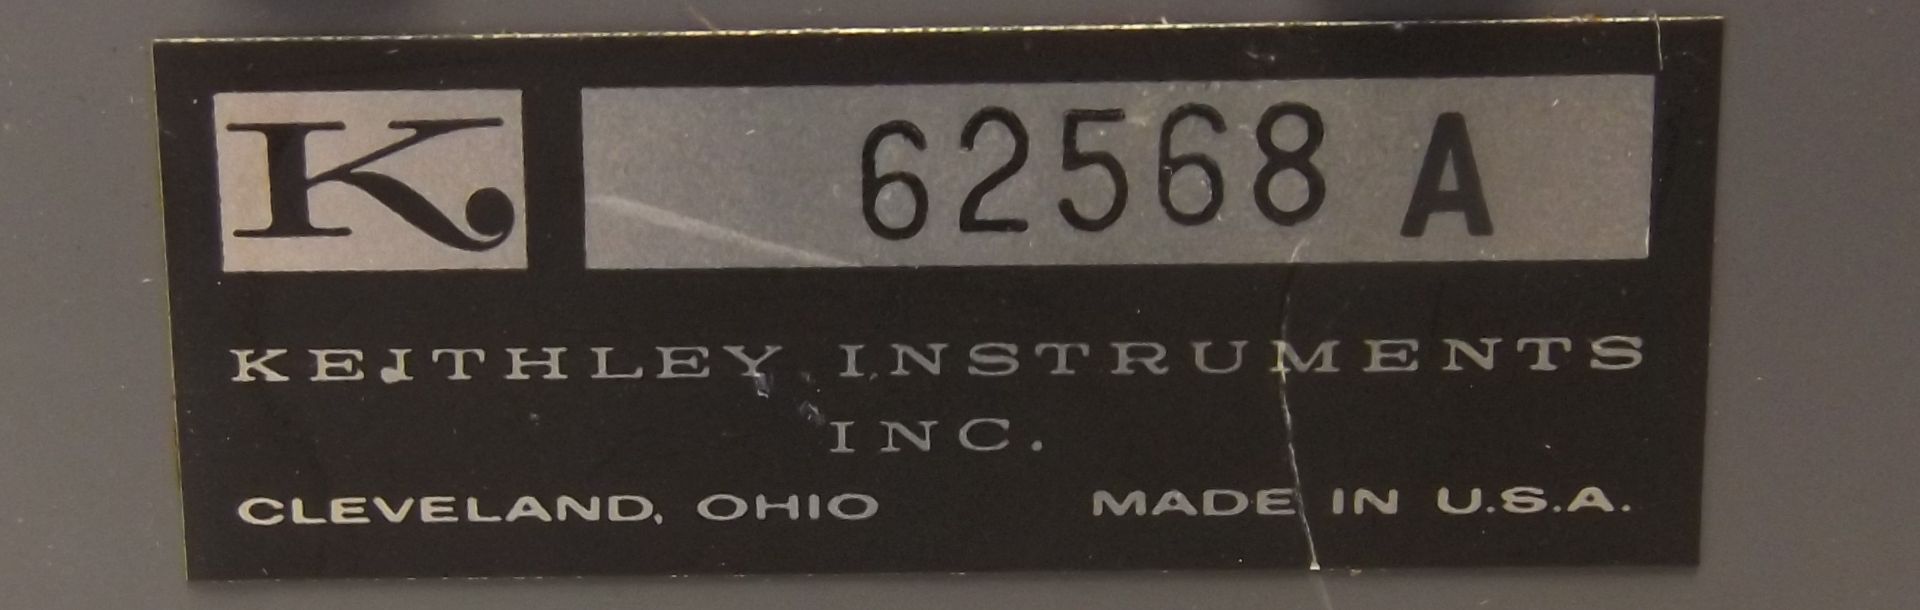 Keithley Instruments 610C Solid State Electrometer - Image 3 of 3